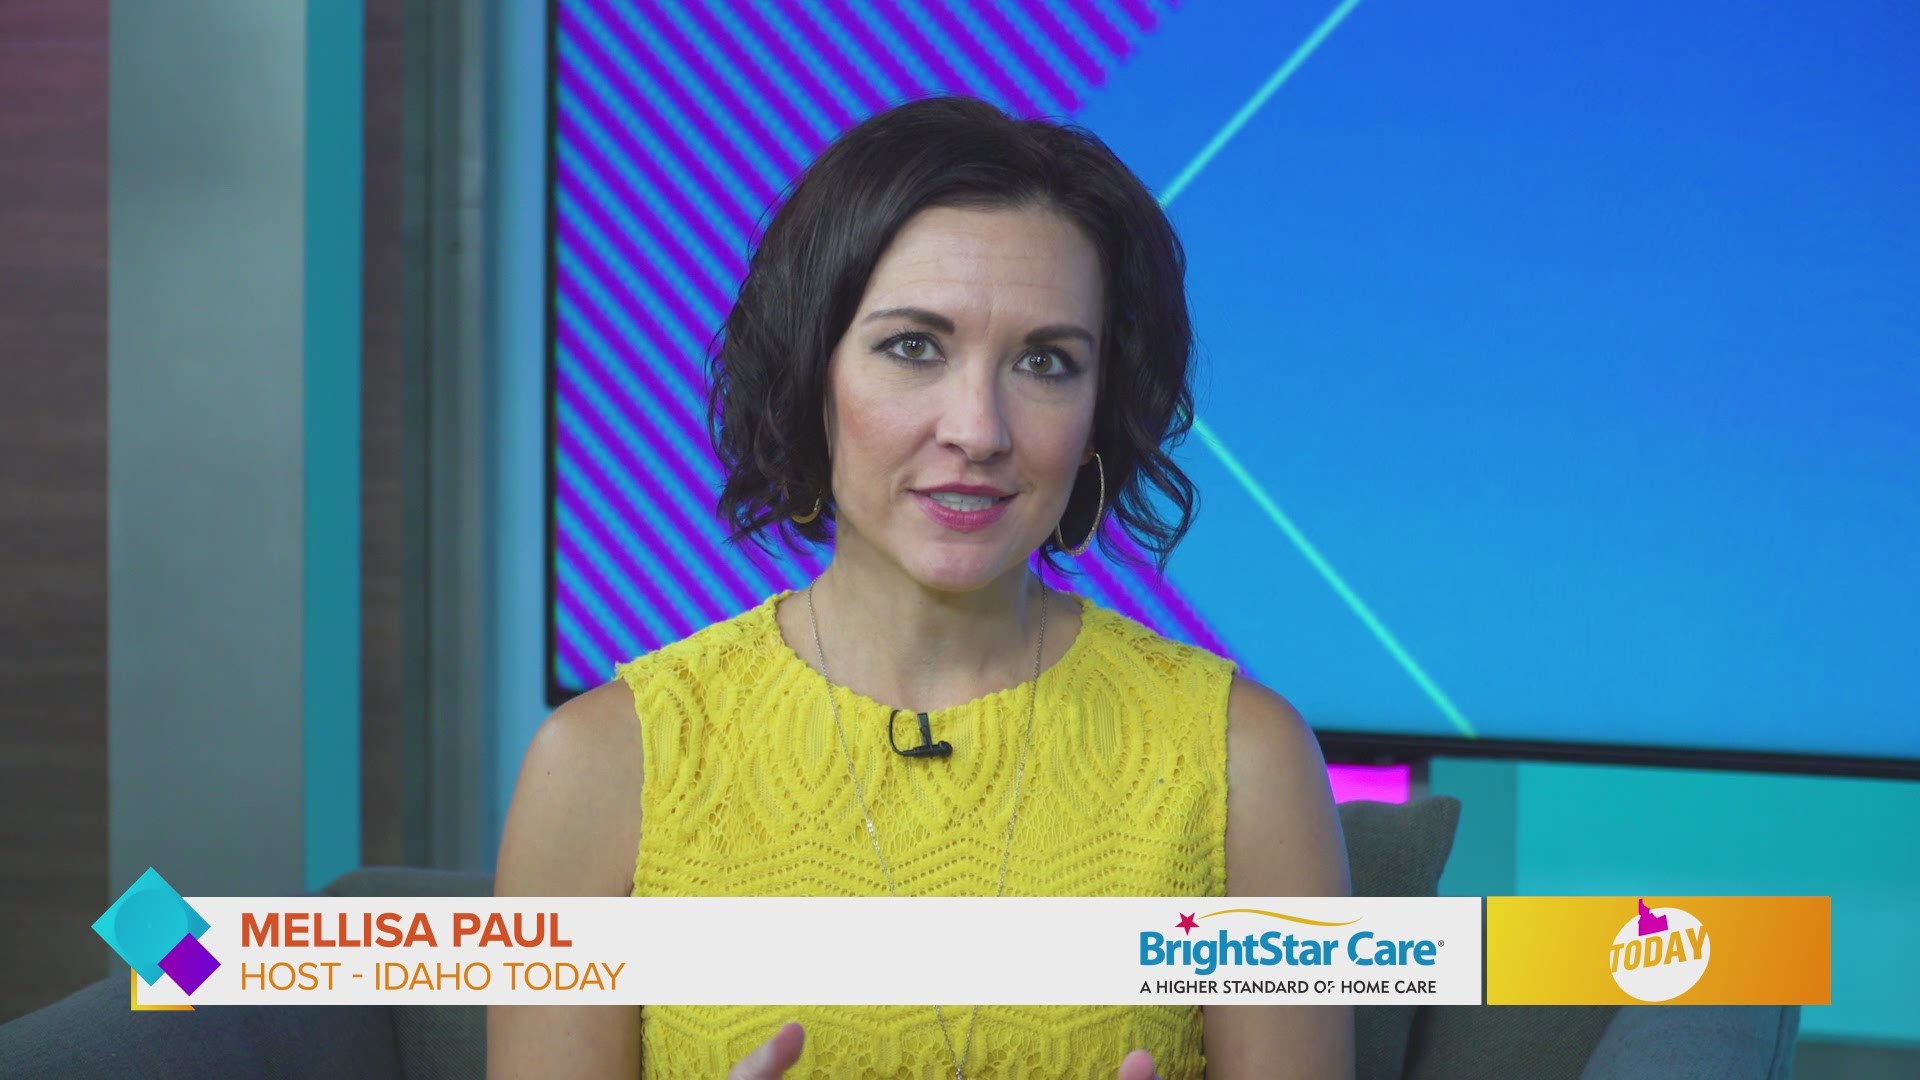 BrightStar Care offers a higher standard of home care. Mellisa Paul discusses with Caroline Moore on why BrightStar Care is the right choice.